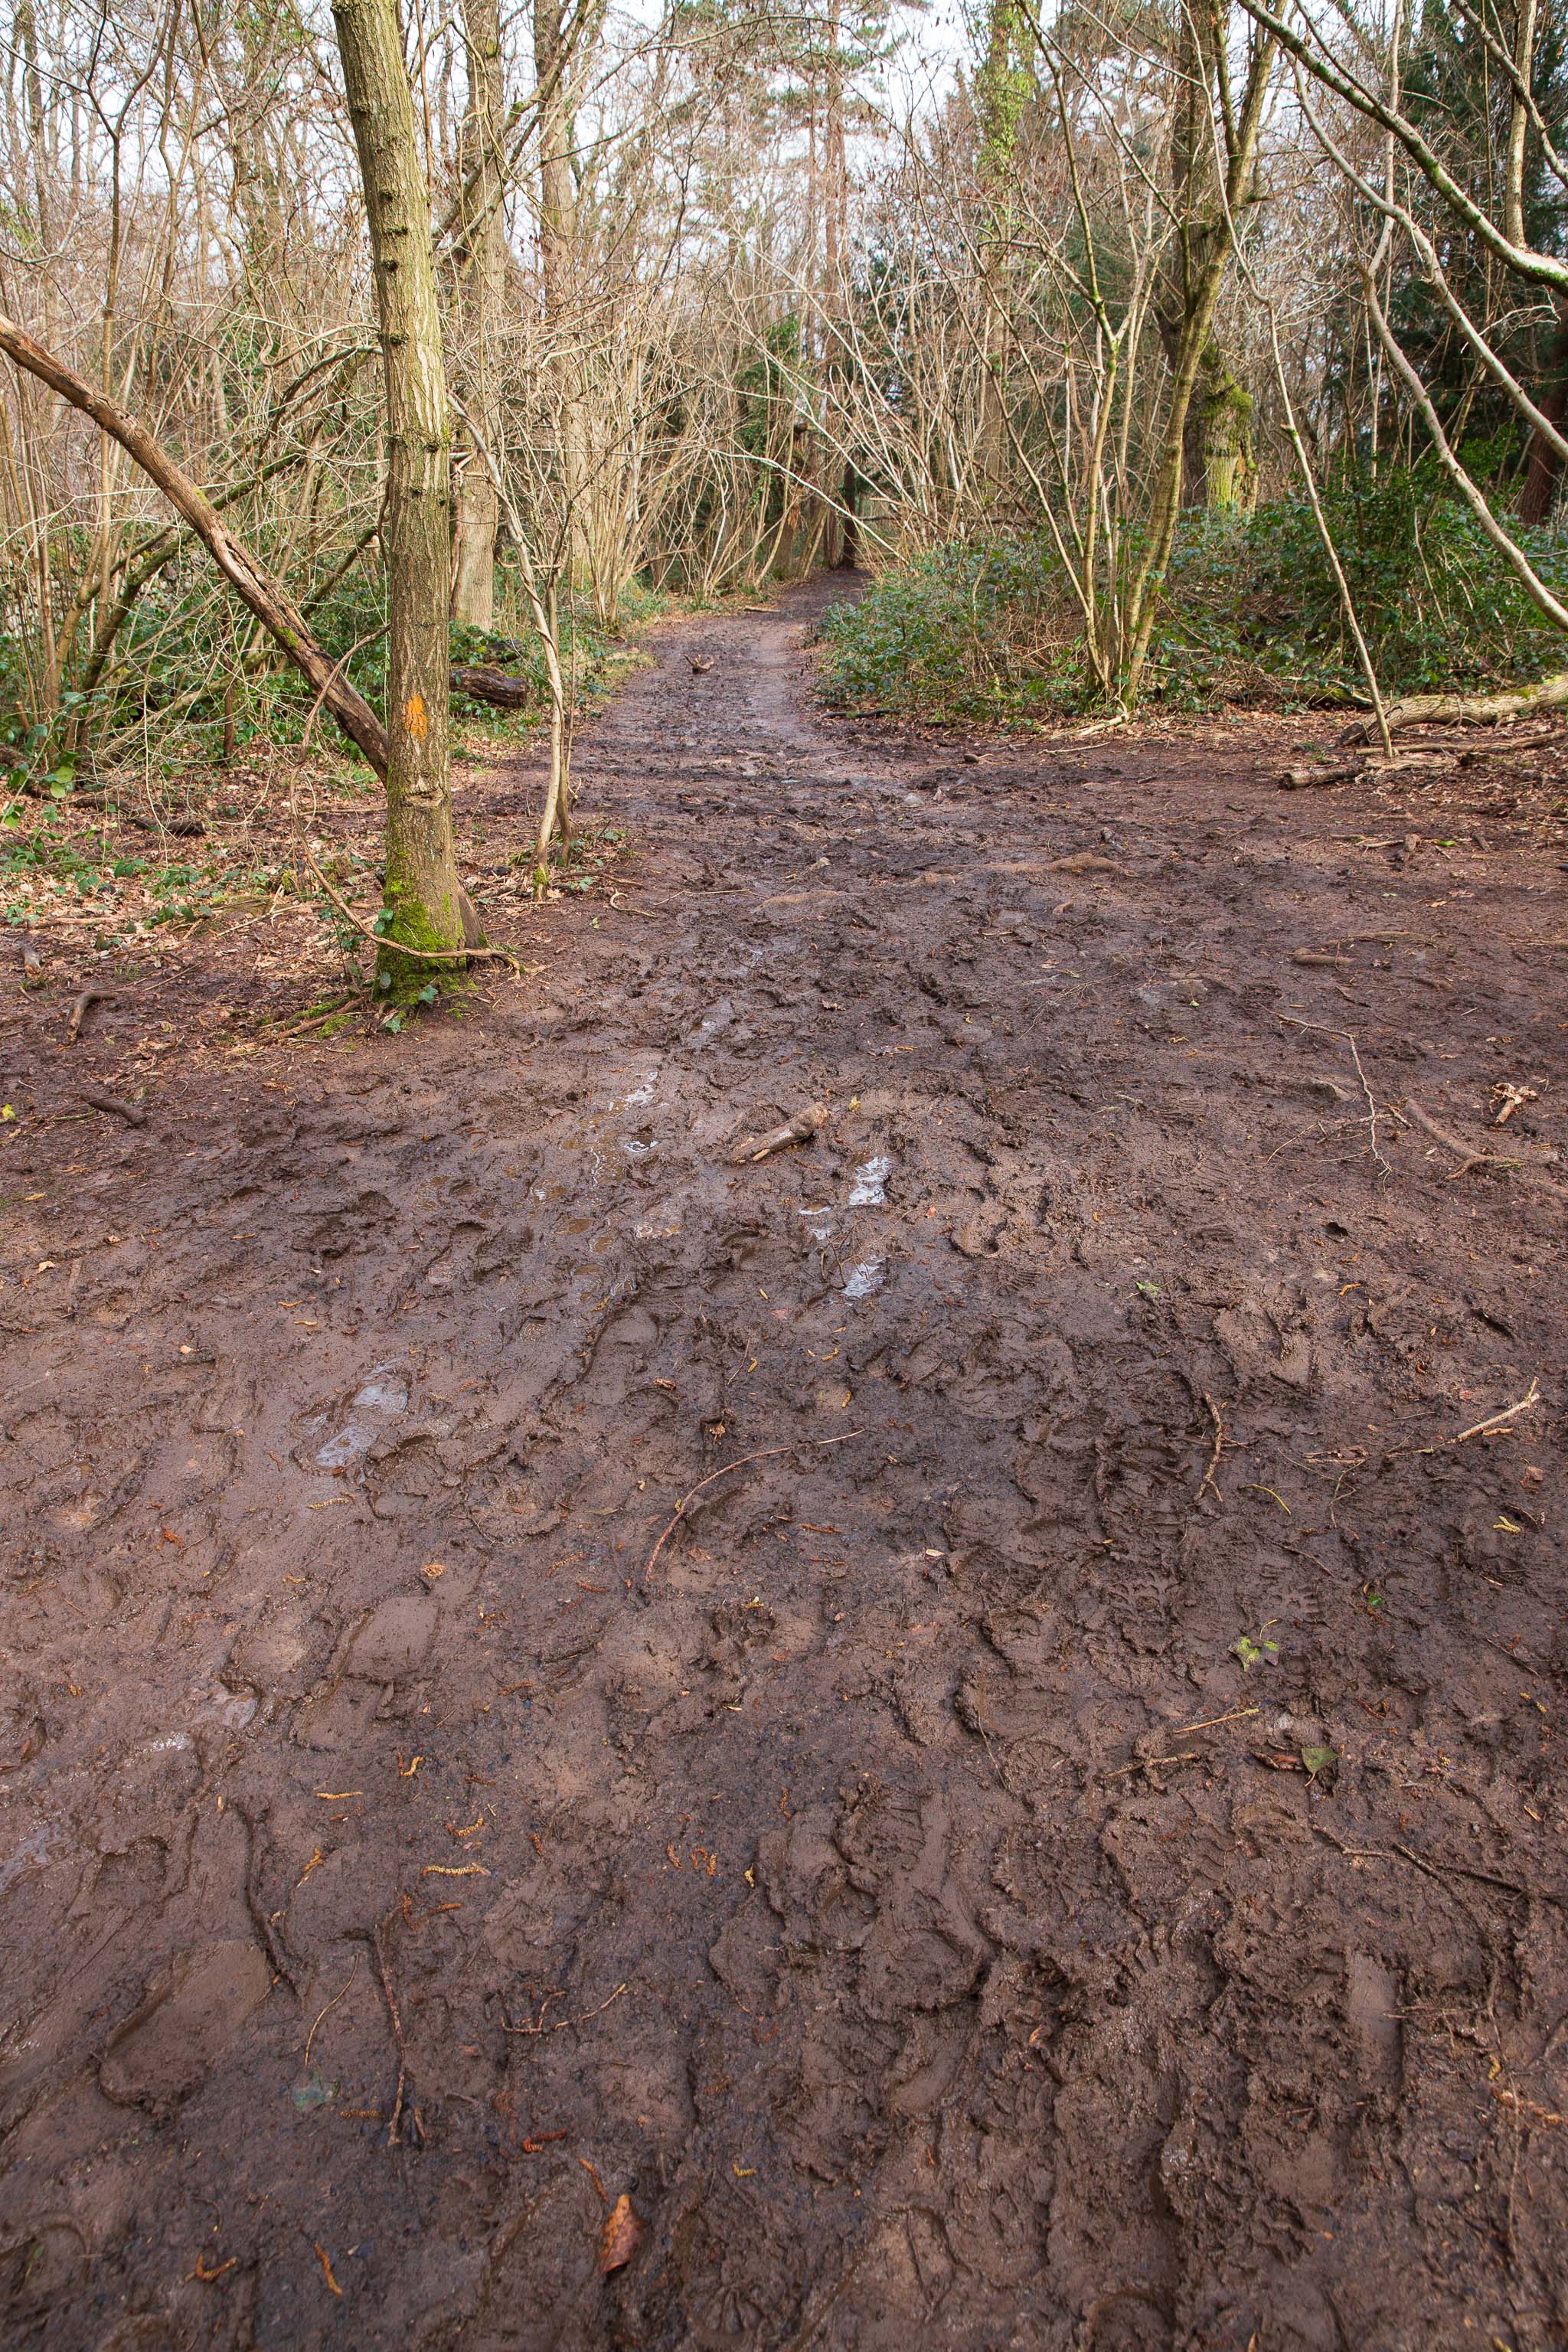 At This Point I Gave Up
I was considering heading a bit further east, towards the edge of the woods, but the mud was making it annoyingly slippy. Maybe another time, like...